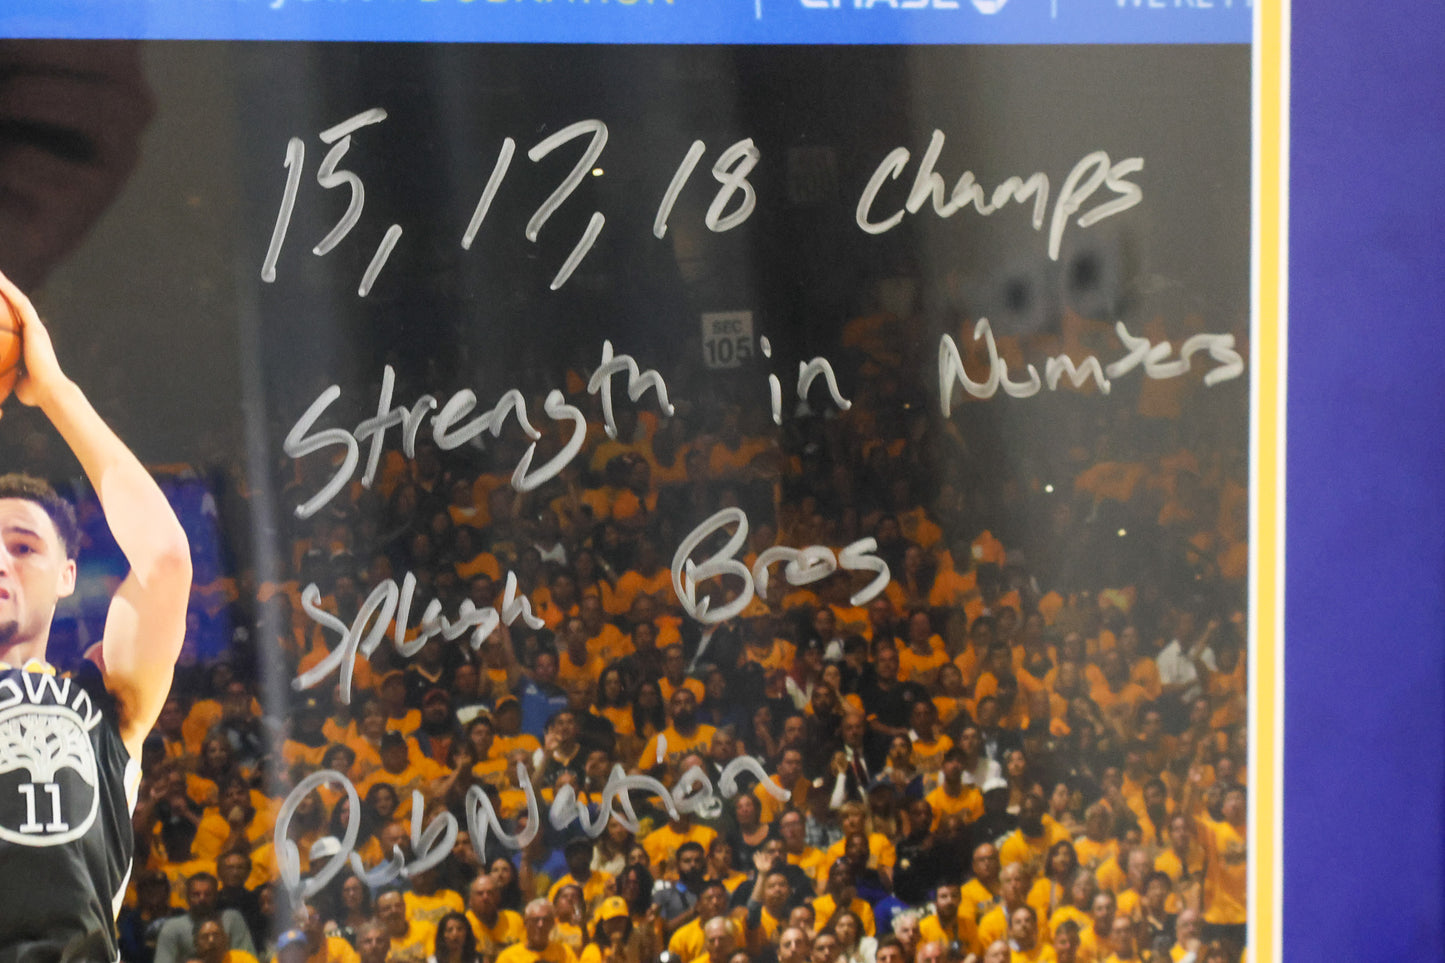 Klay Thompson Autographed Golden State Warriors 16X20 Photo “15,17,18 Champs Strength in Numbers Splash Bros Dub Nation”